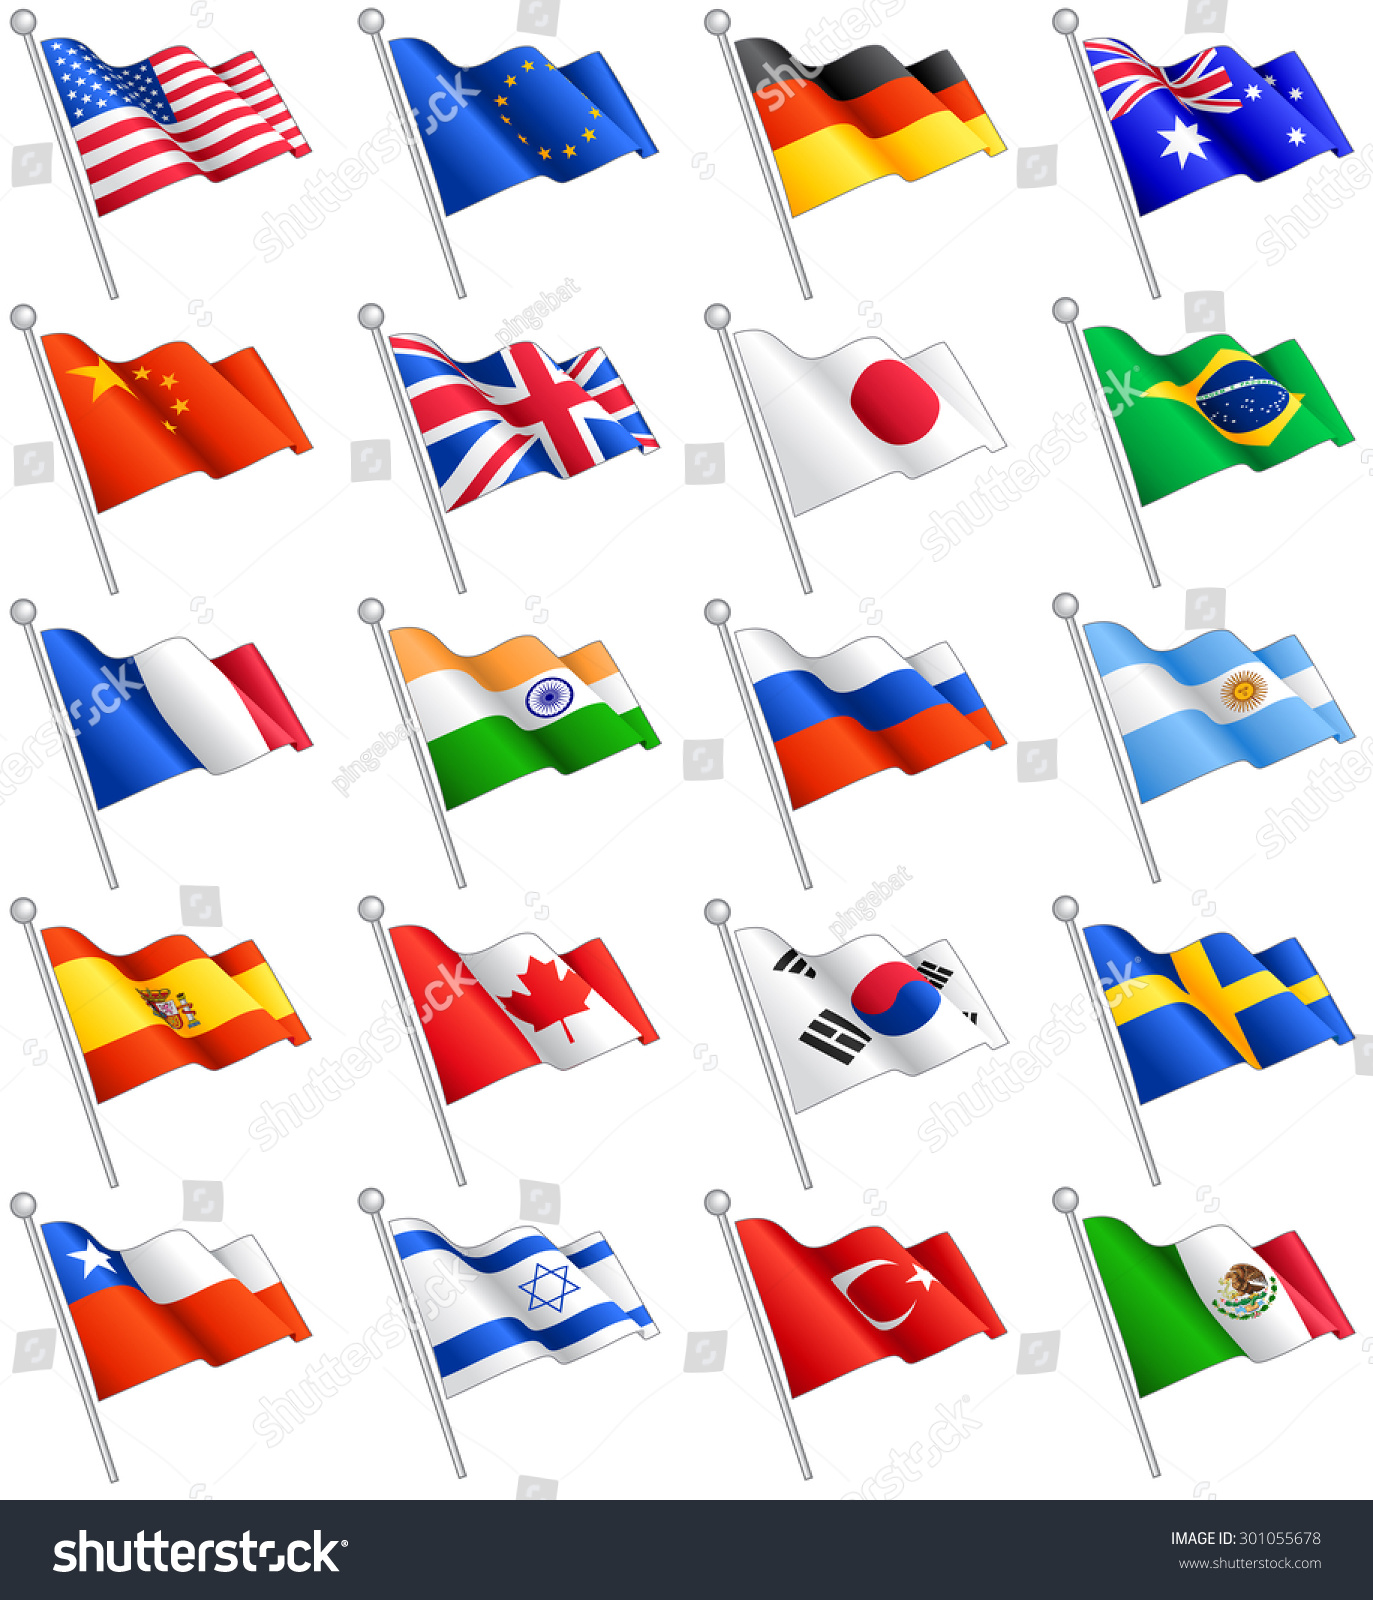 clipart world flags free - photo #27